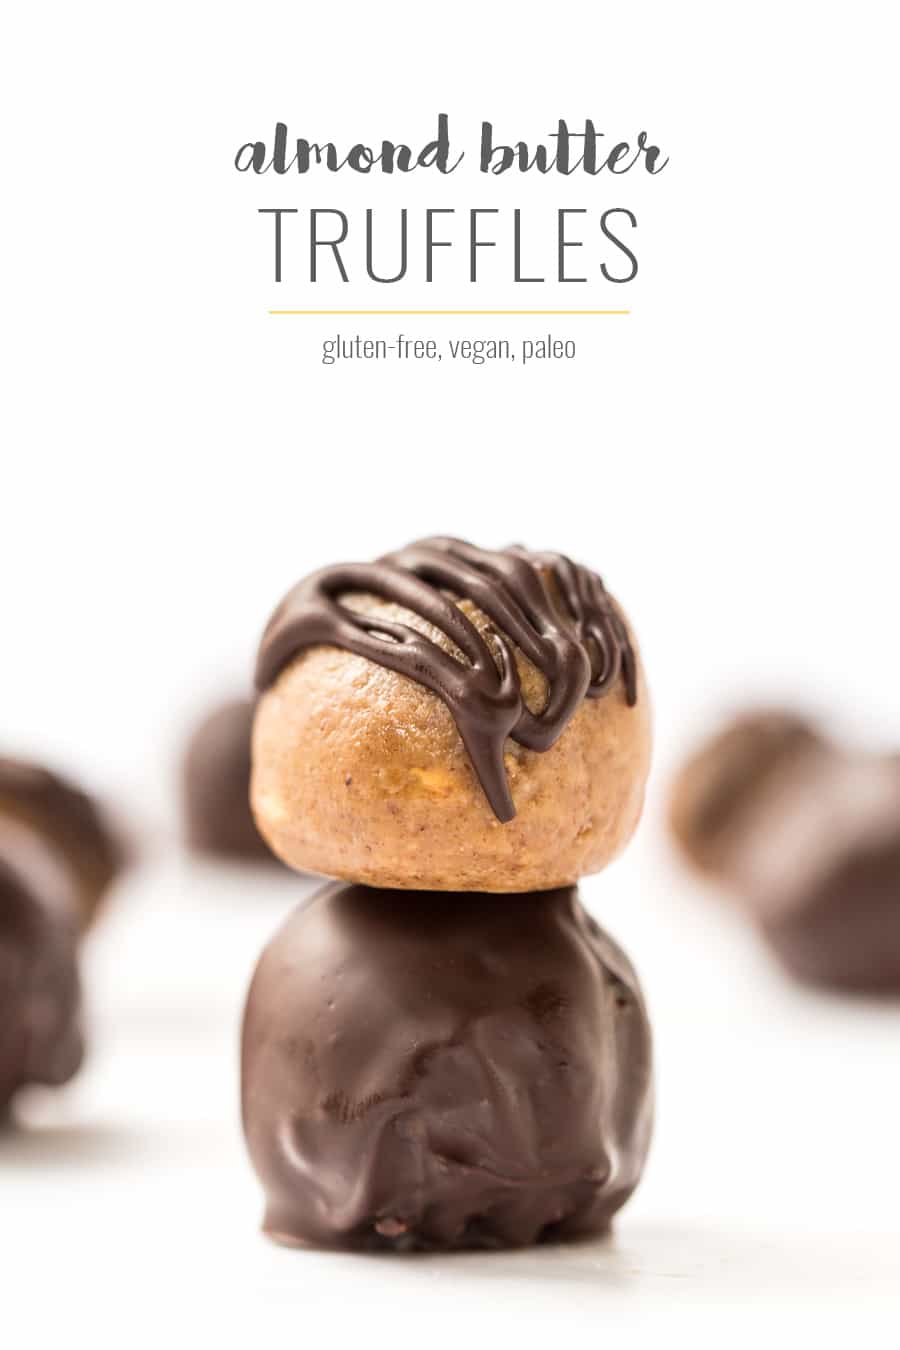 These are THE BEST Almond Butter Truffles I've ever had. Only use 4 ingredients, are super simple to make and taste awesome!